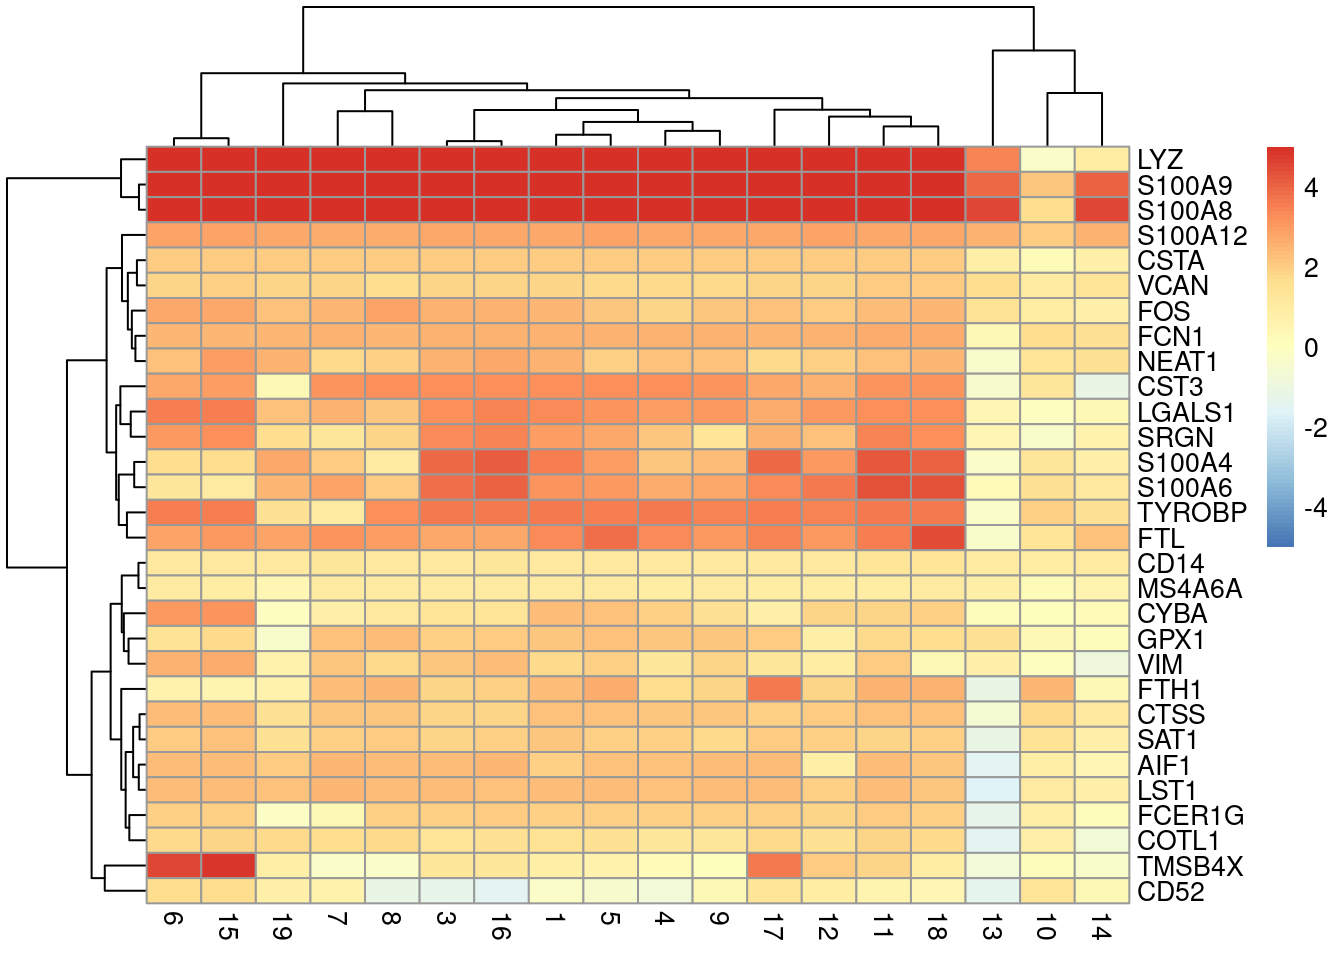 Heatmap of log~2~-fold changes for the top marker genes (rows) of cluster 2 compared to all other clusters (columns).